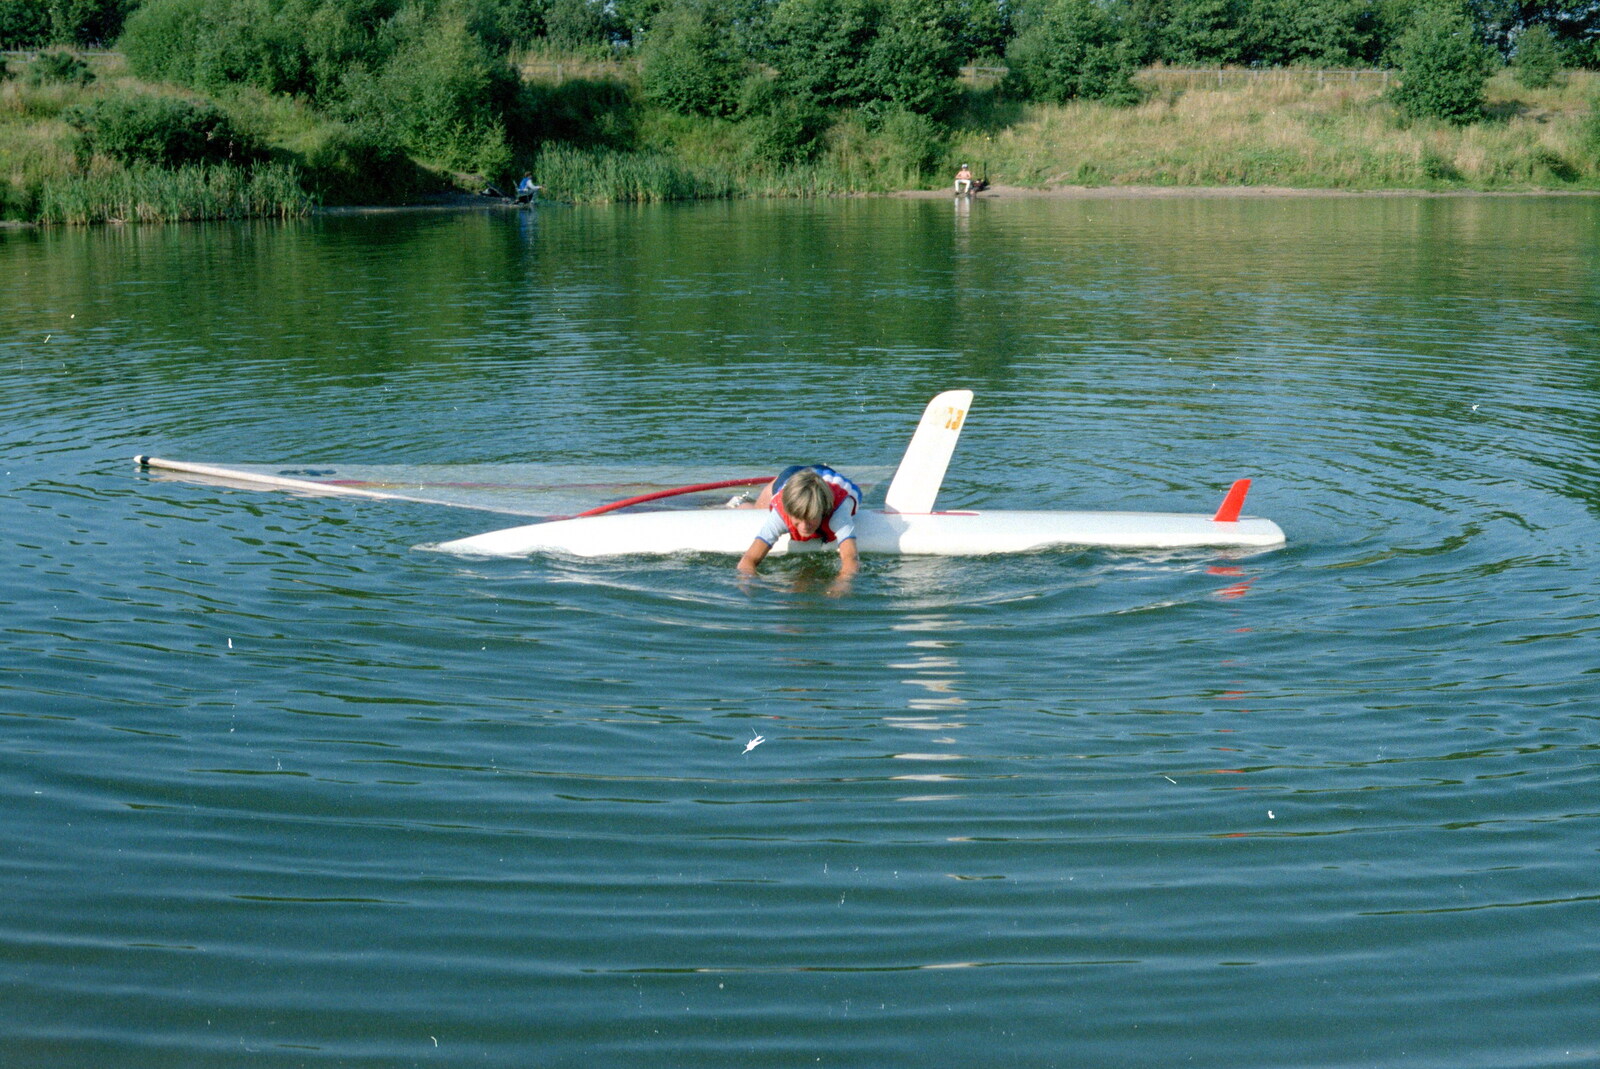 It's all over, as Nosher paddles back from Nosher Goes Windsurfing, Macclesfield, Cheshire - 20th June 1985